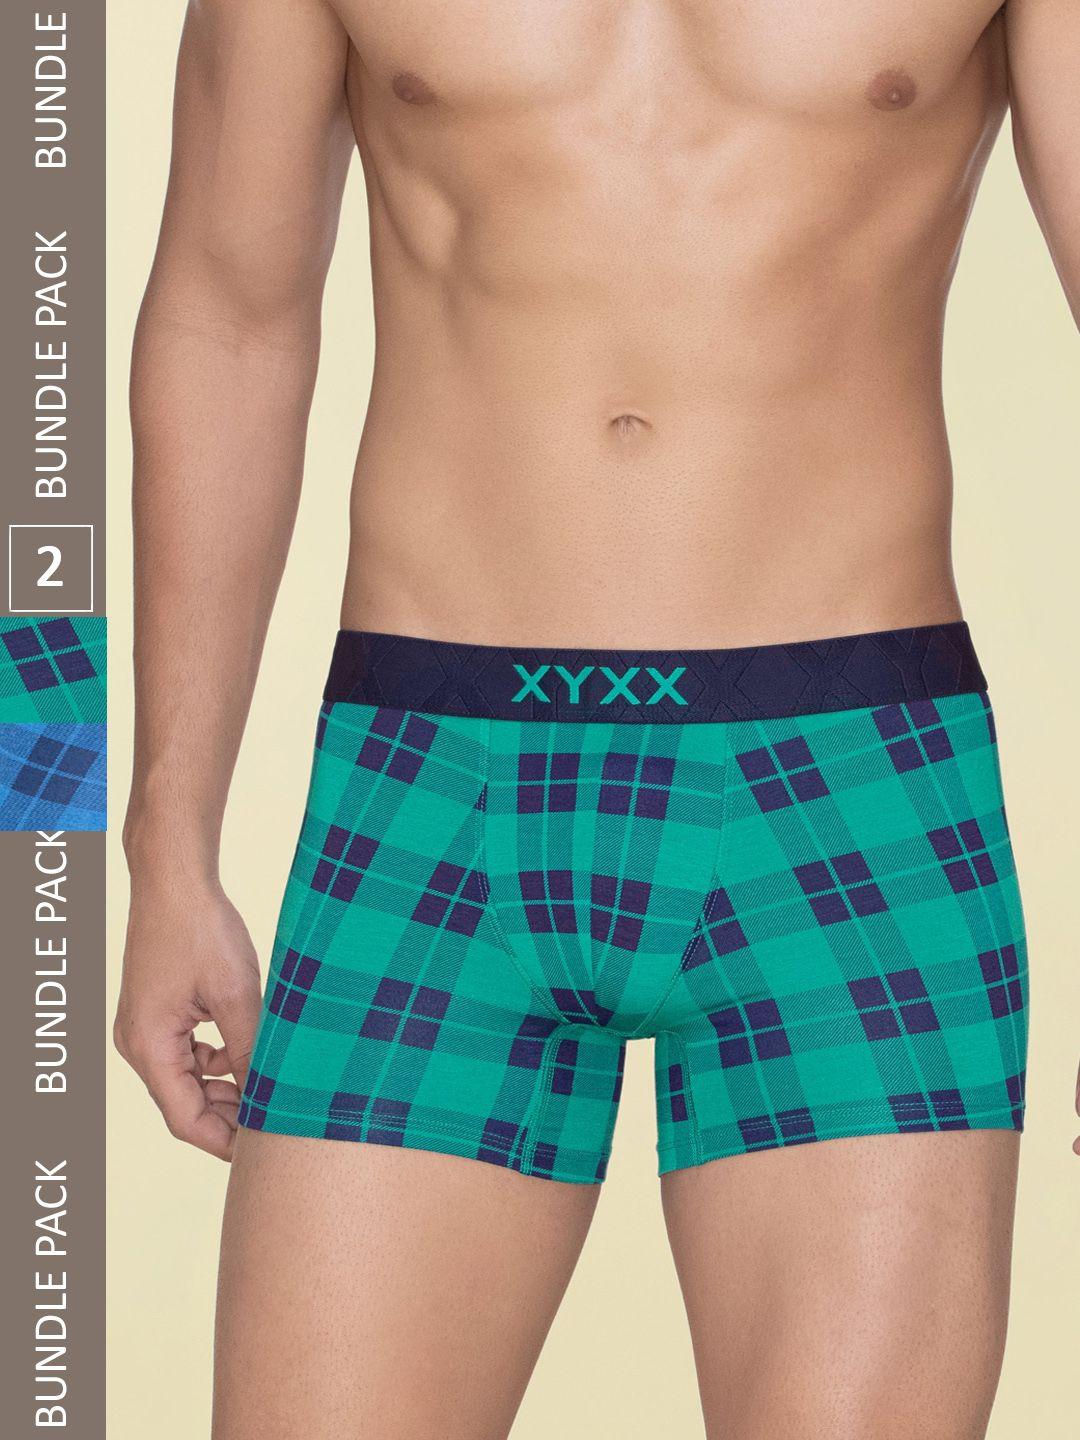 xyxx men pack of 2 checked trunks xytrnk2pckn712